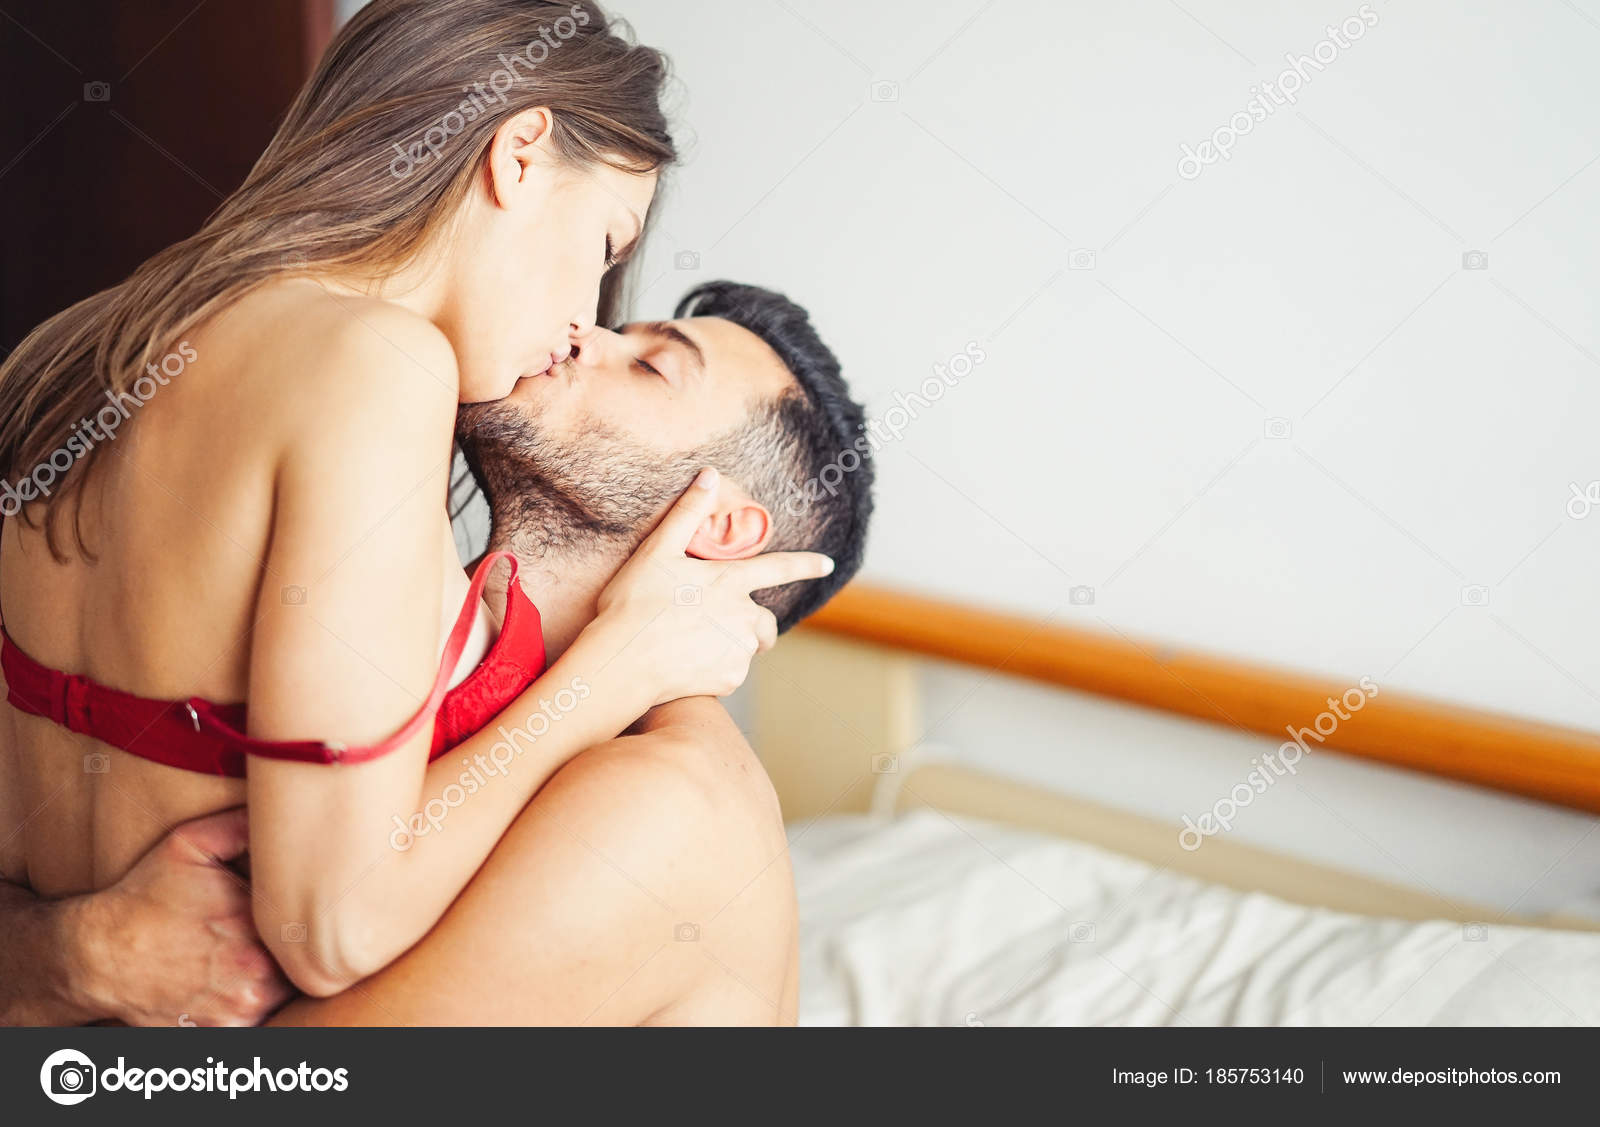 Passionate Sex The Morning